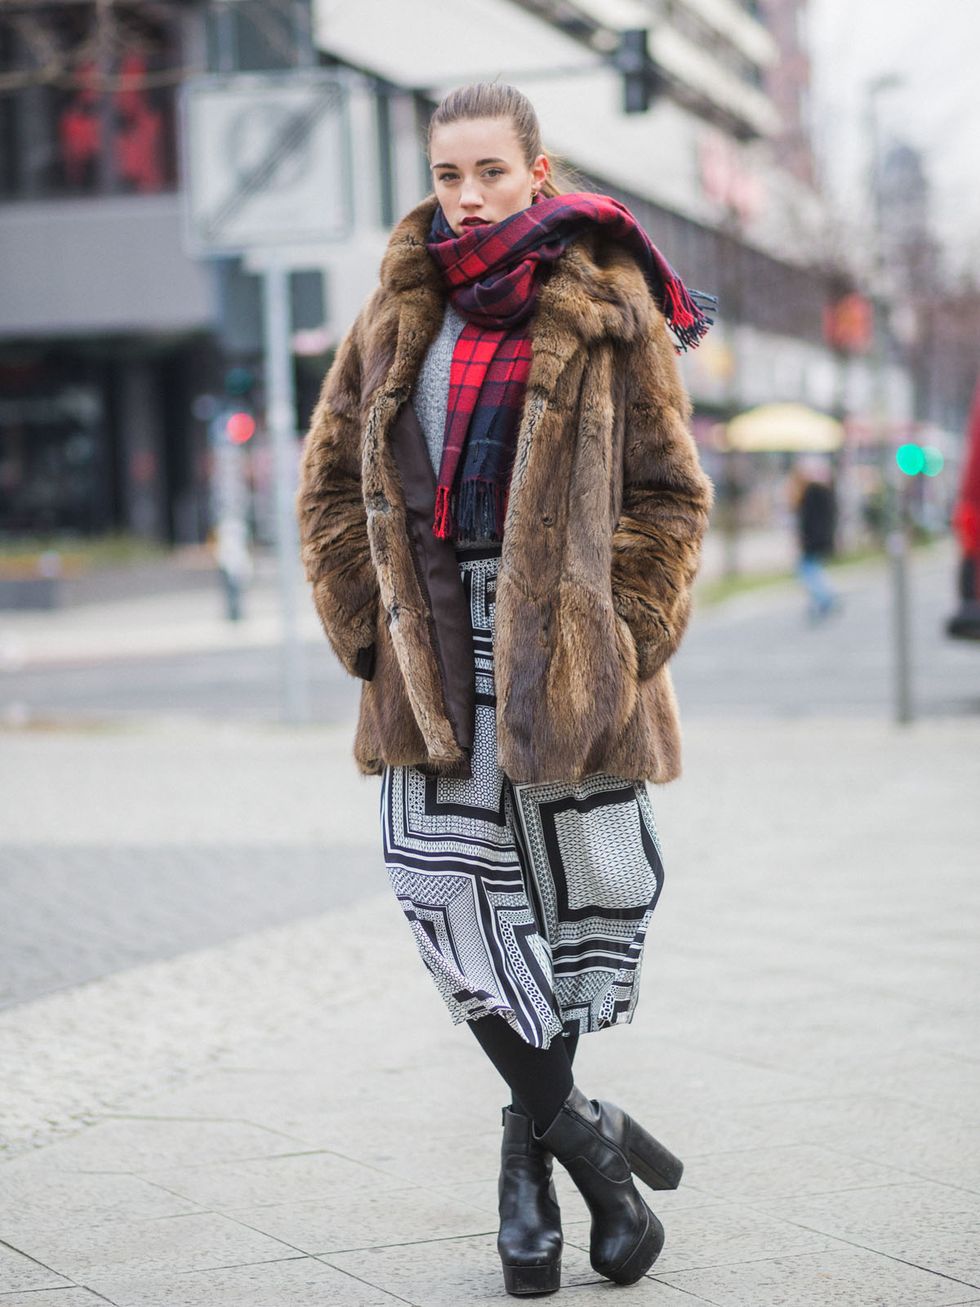 Winter, Road, Textile, Outerwear, Jacket, Street, Fur clothing, Street fashion, Natural material, Pattern, 